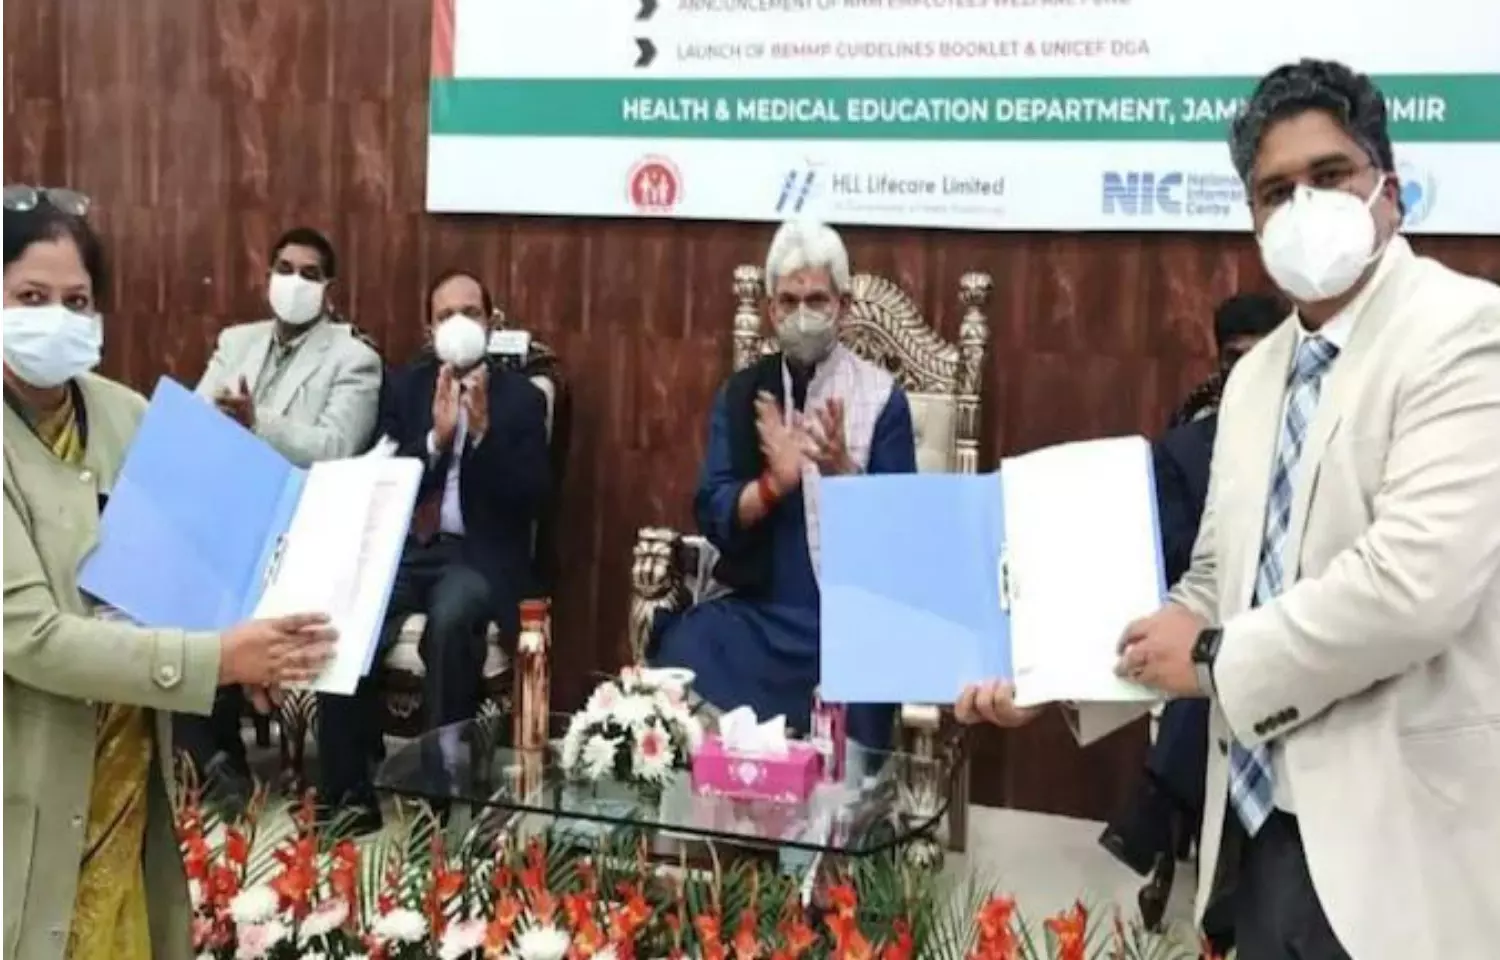 GMC Jammu join hands with Tata Memorial Hospital to develop modern cancer care facilities